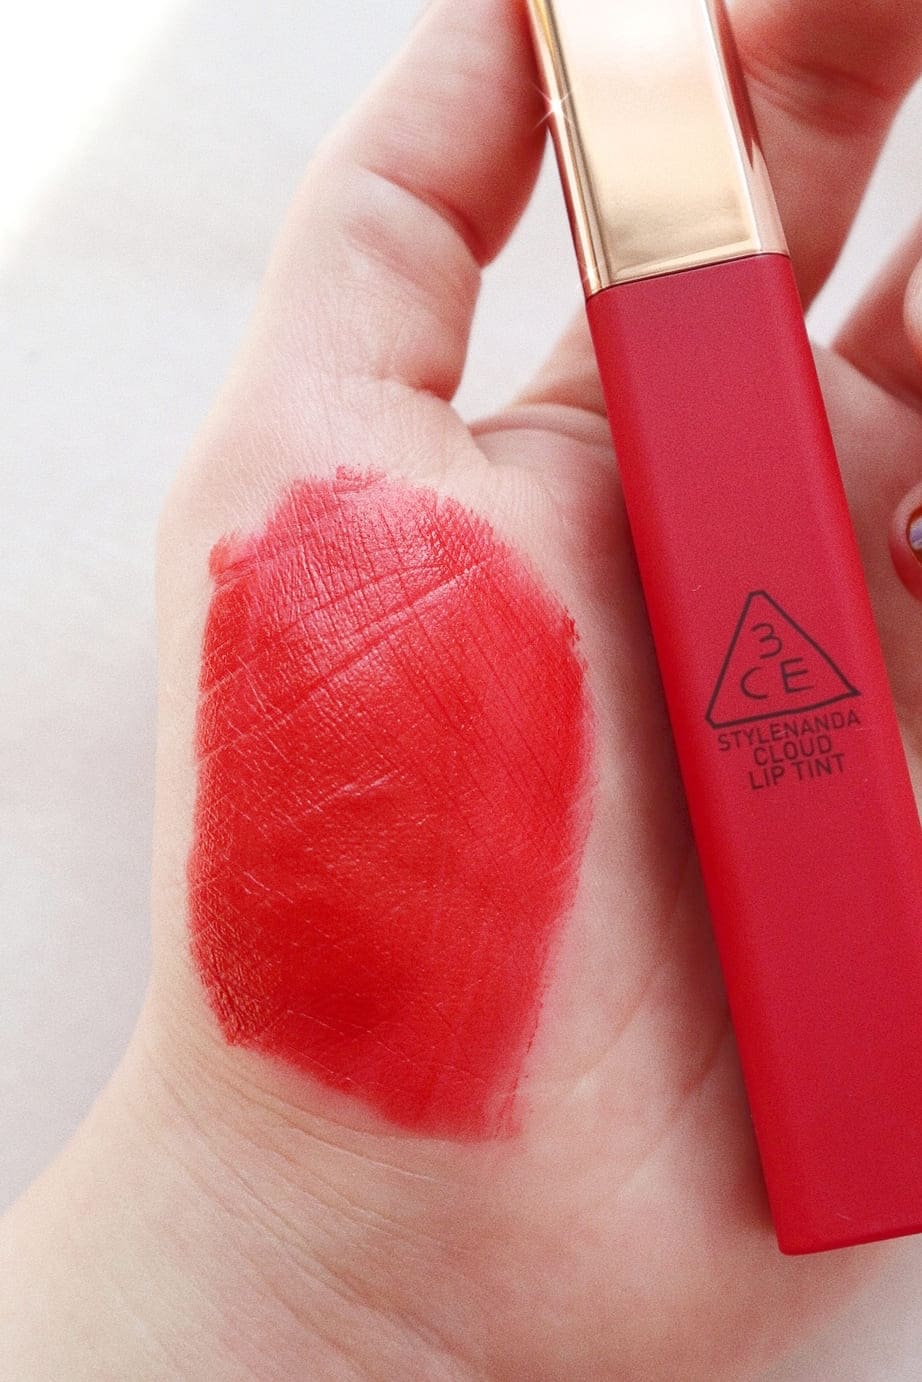 The 8 Best Korean Lip Tints And Stains For Every Look Kbeauty Addiction 4785